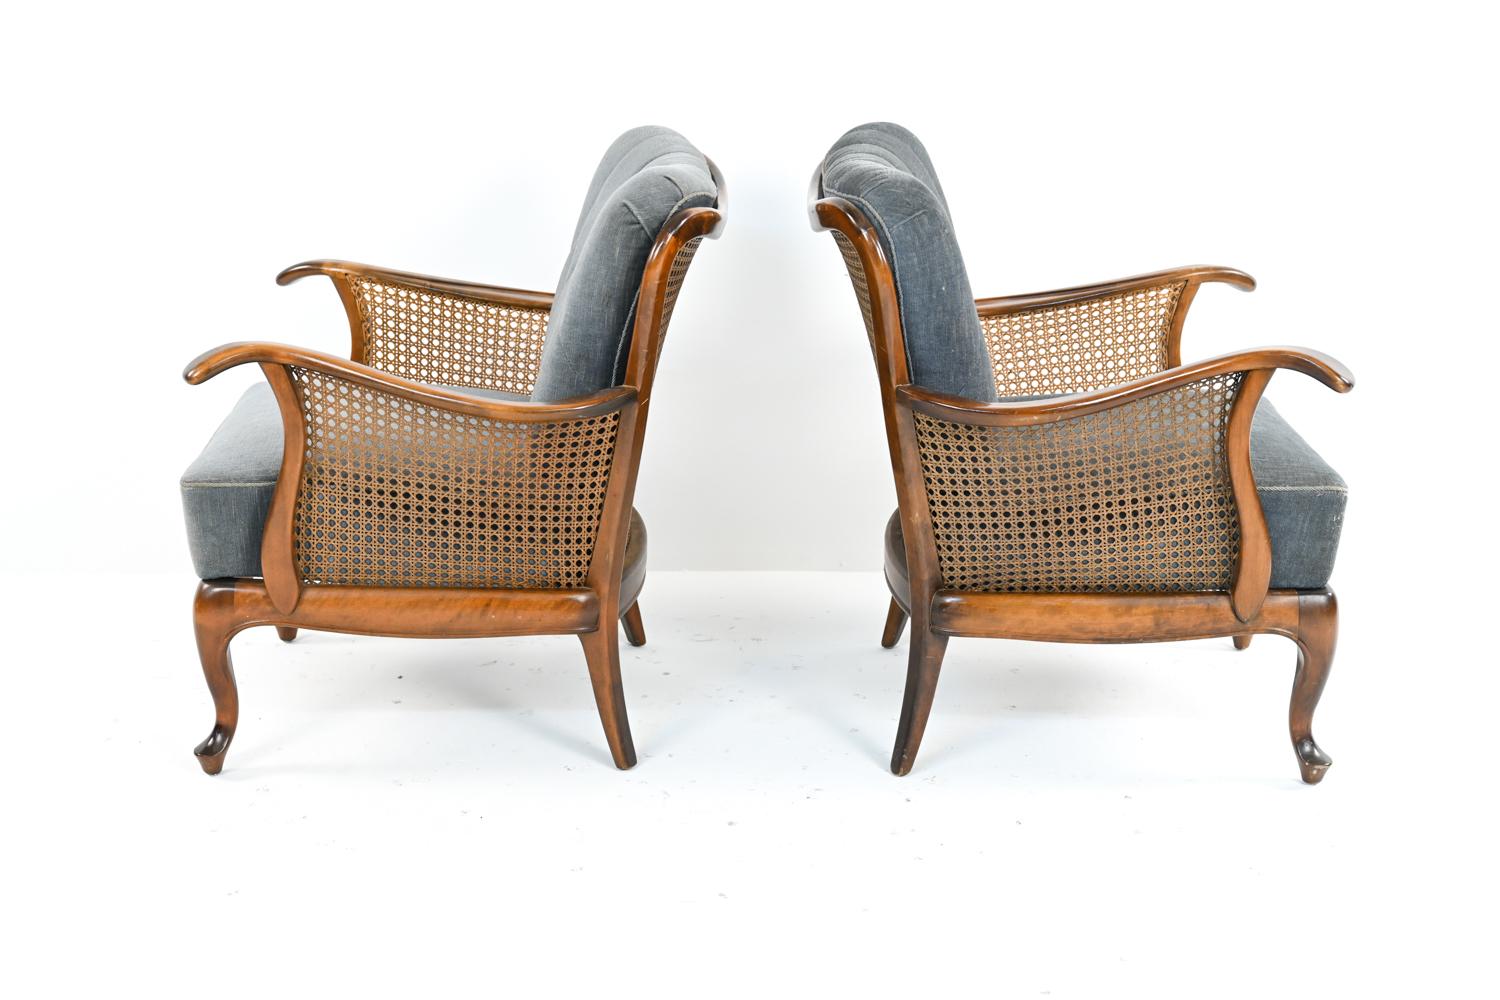 Pair of Early Danish Modern Caned Bergere Chairs, c. 1940's 1